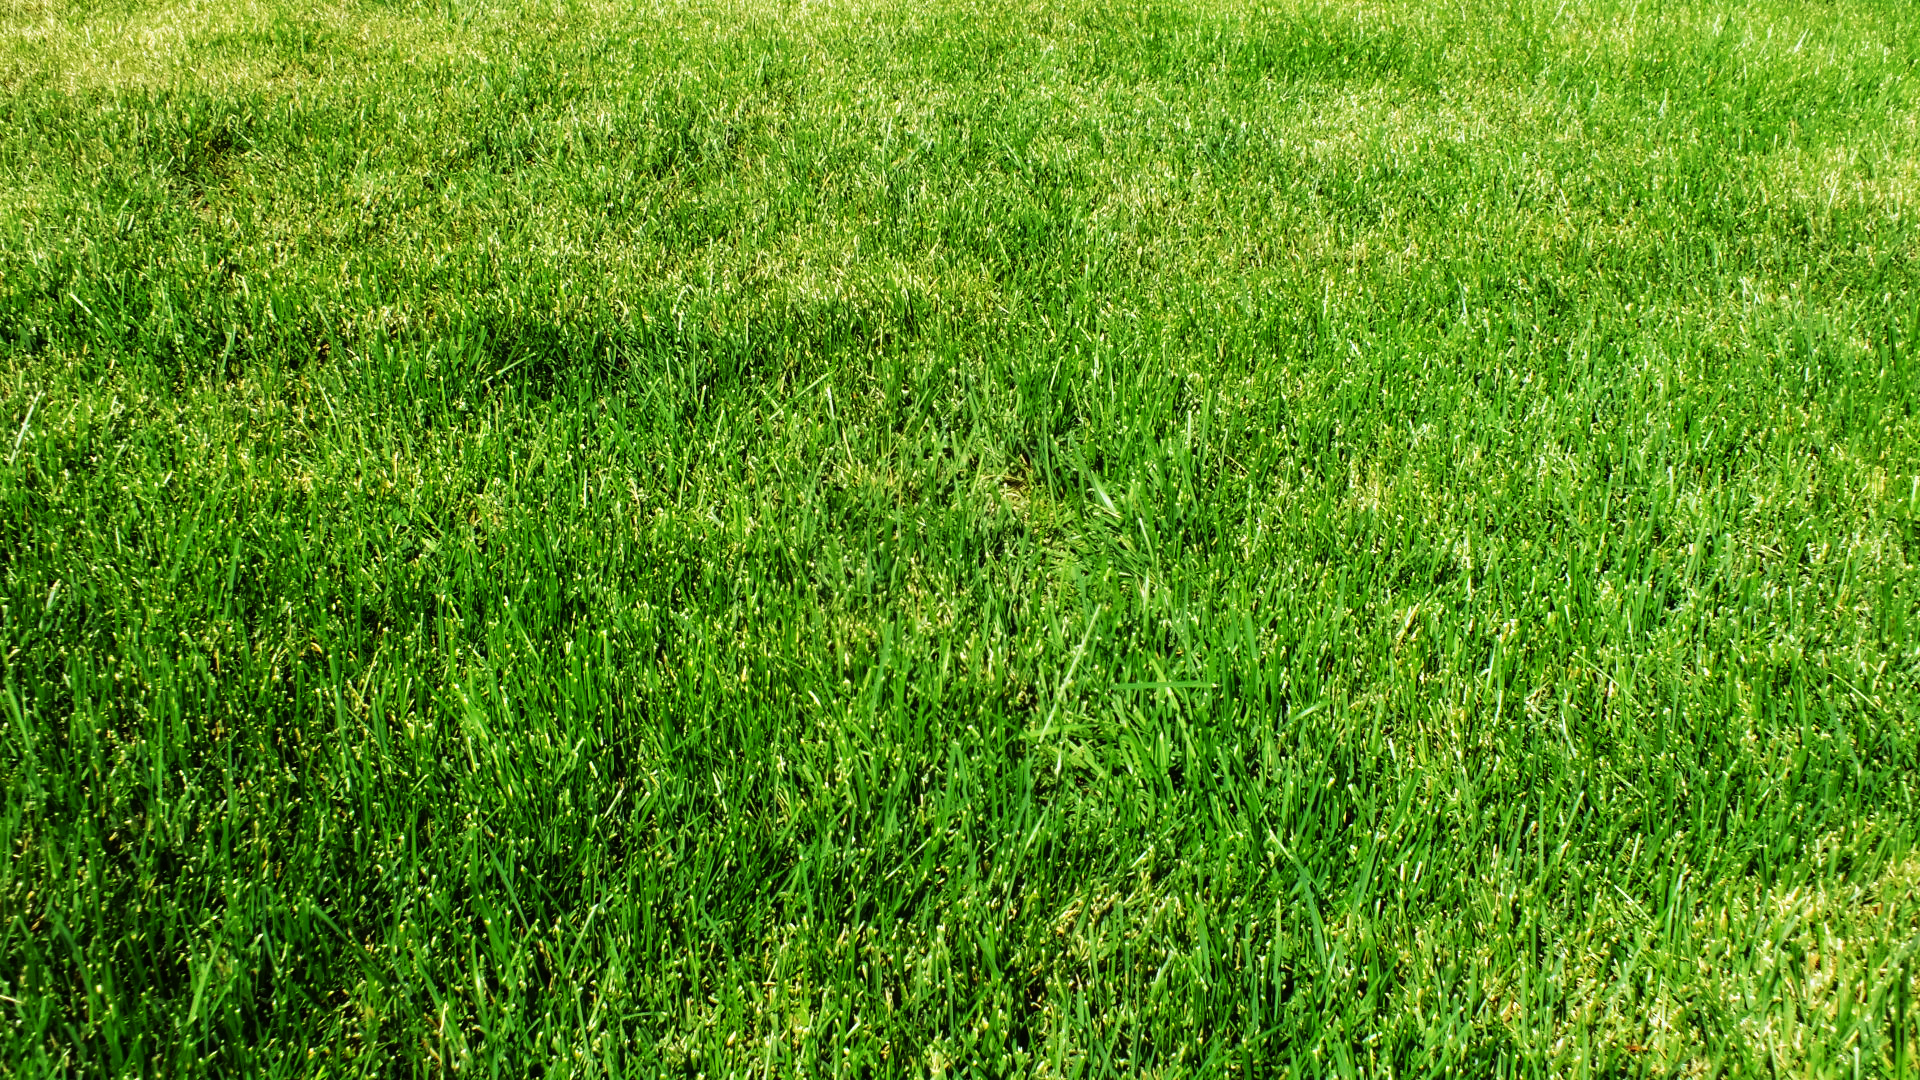 Grass Wallpapers and Background Images - stmed.net